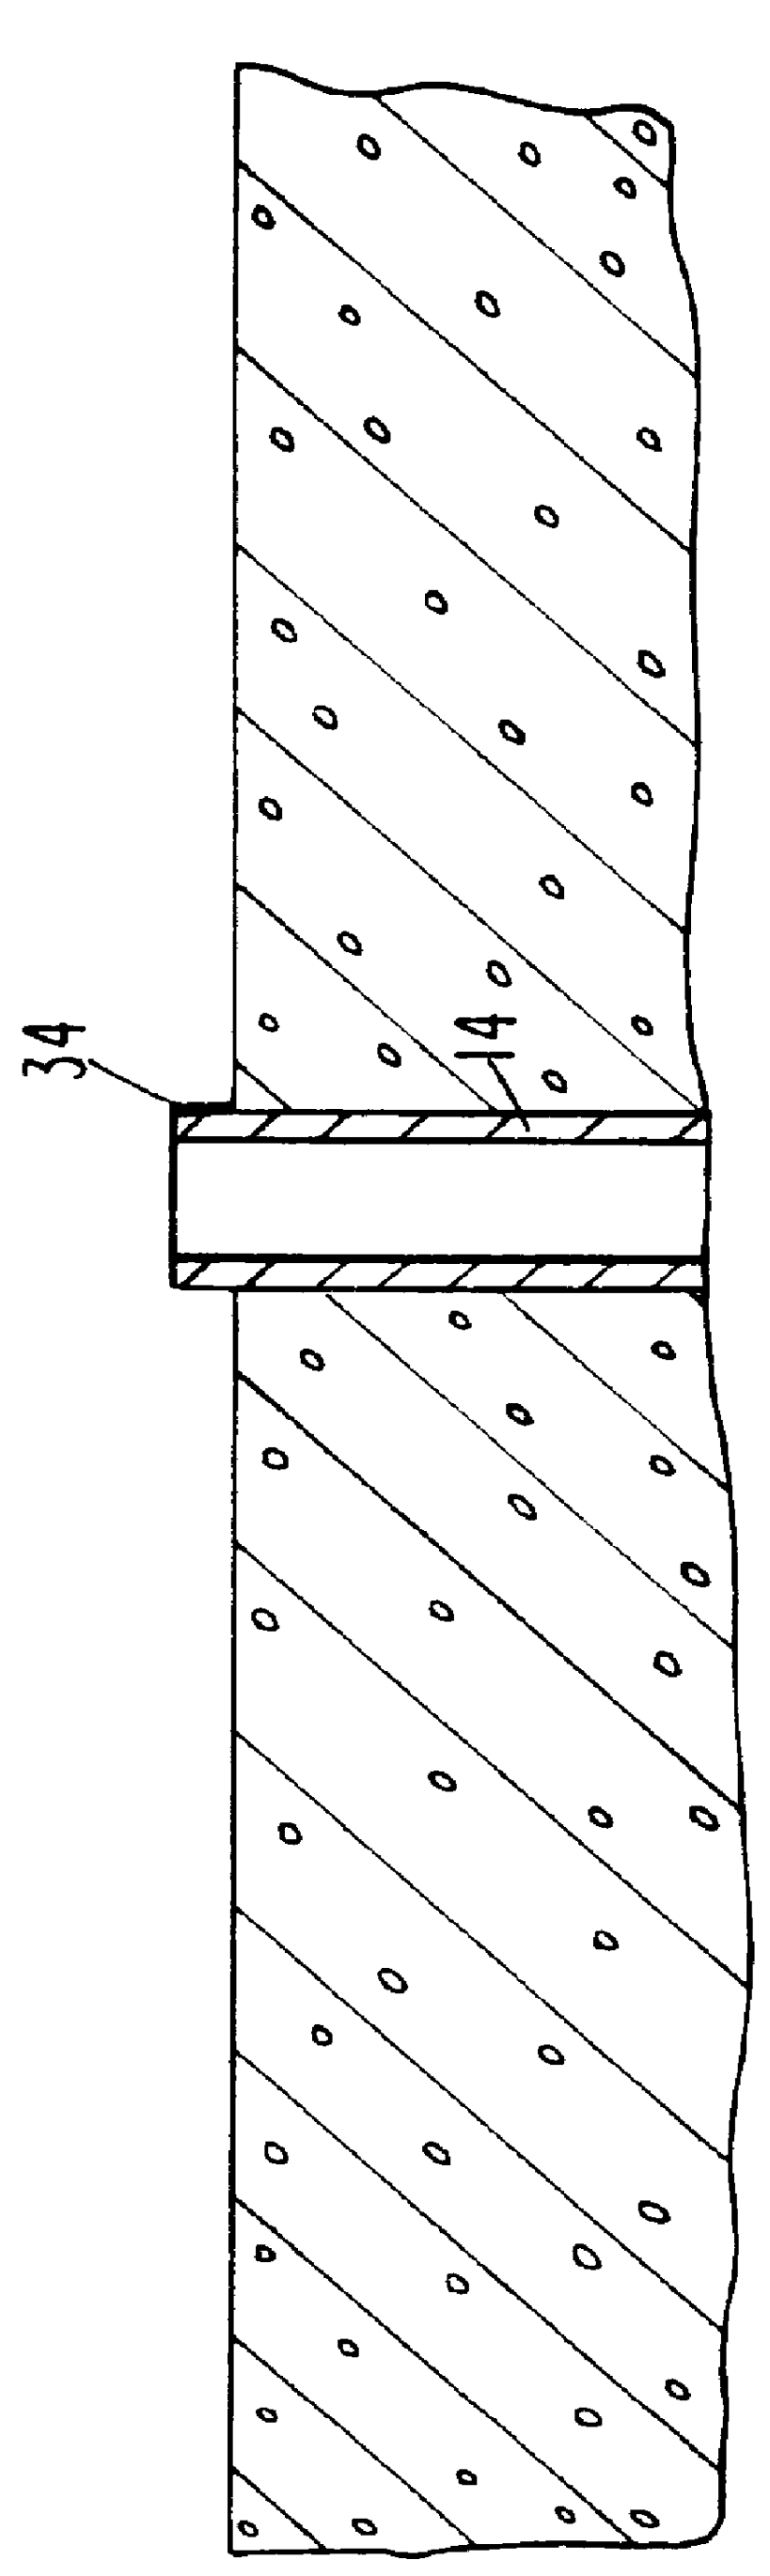 Method for re-insulating installed steam pipe in situ